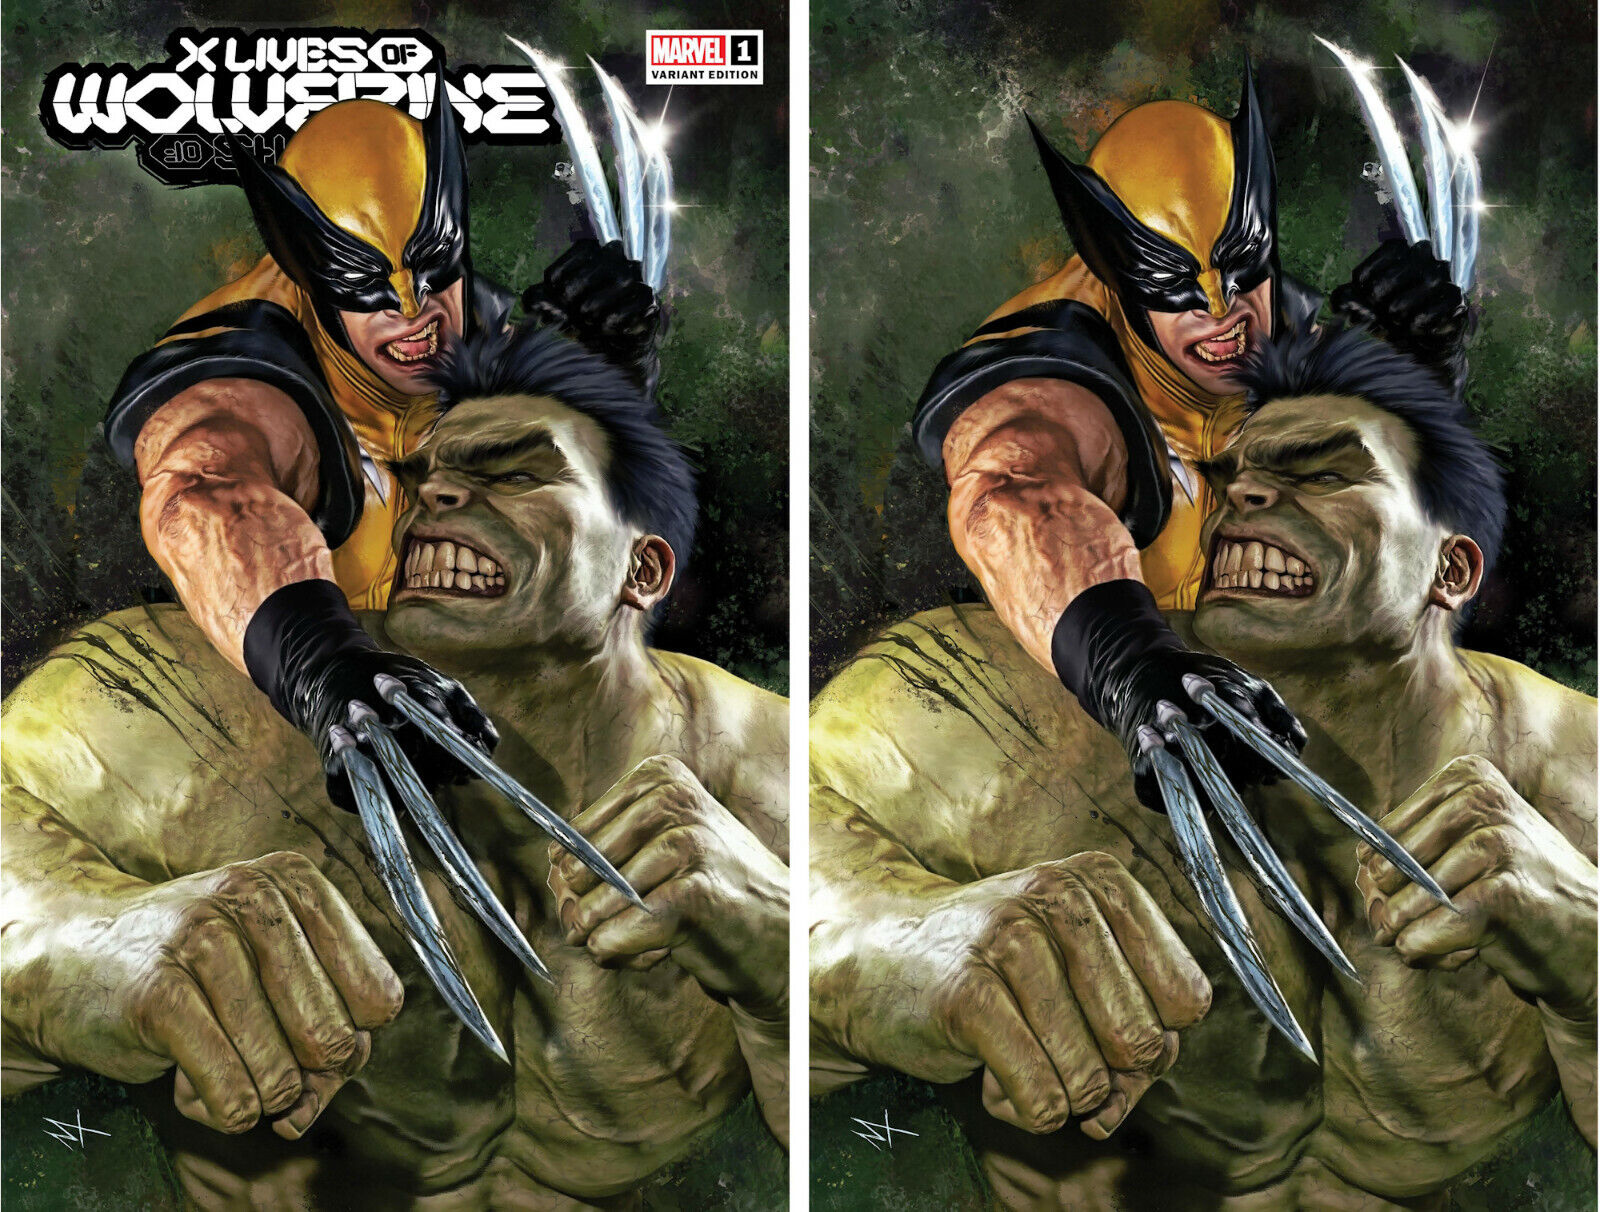 X LIVES OF WOLVERINE #1 (MARCO TURINI EXCLUSIVE TRADE/VIRGIN SET) ~ IN STOCK